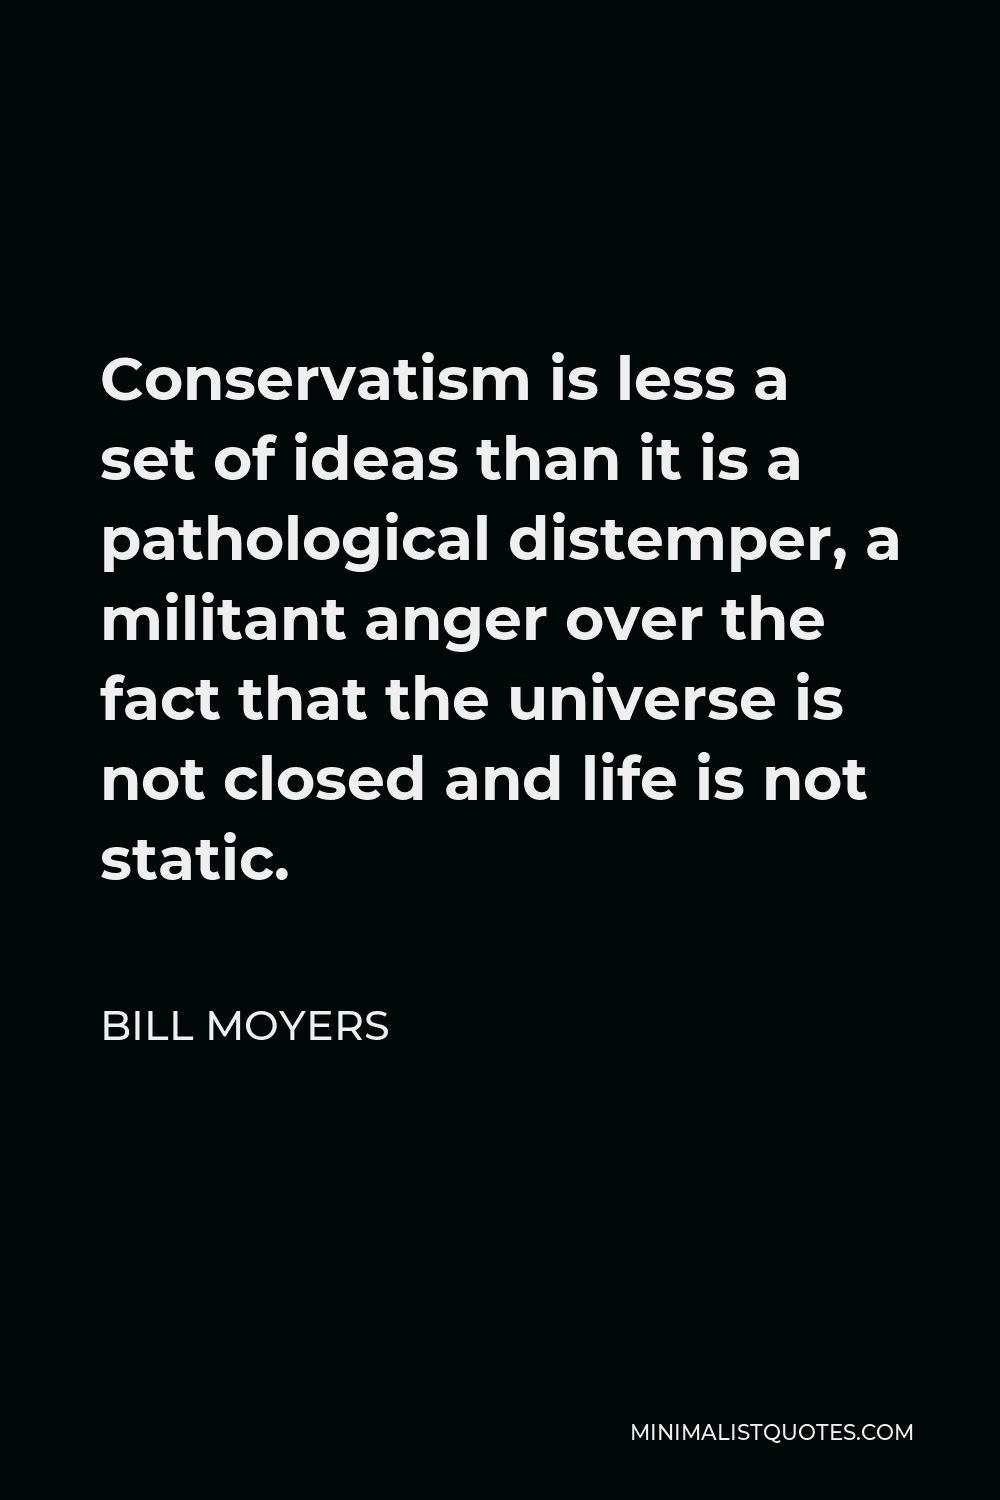 Bill Moyers Quote - Conservatism is less a set of ideas than it is a pathological distemper, a militant anger over the fact that the universe is not closed and life is not static.